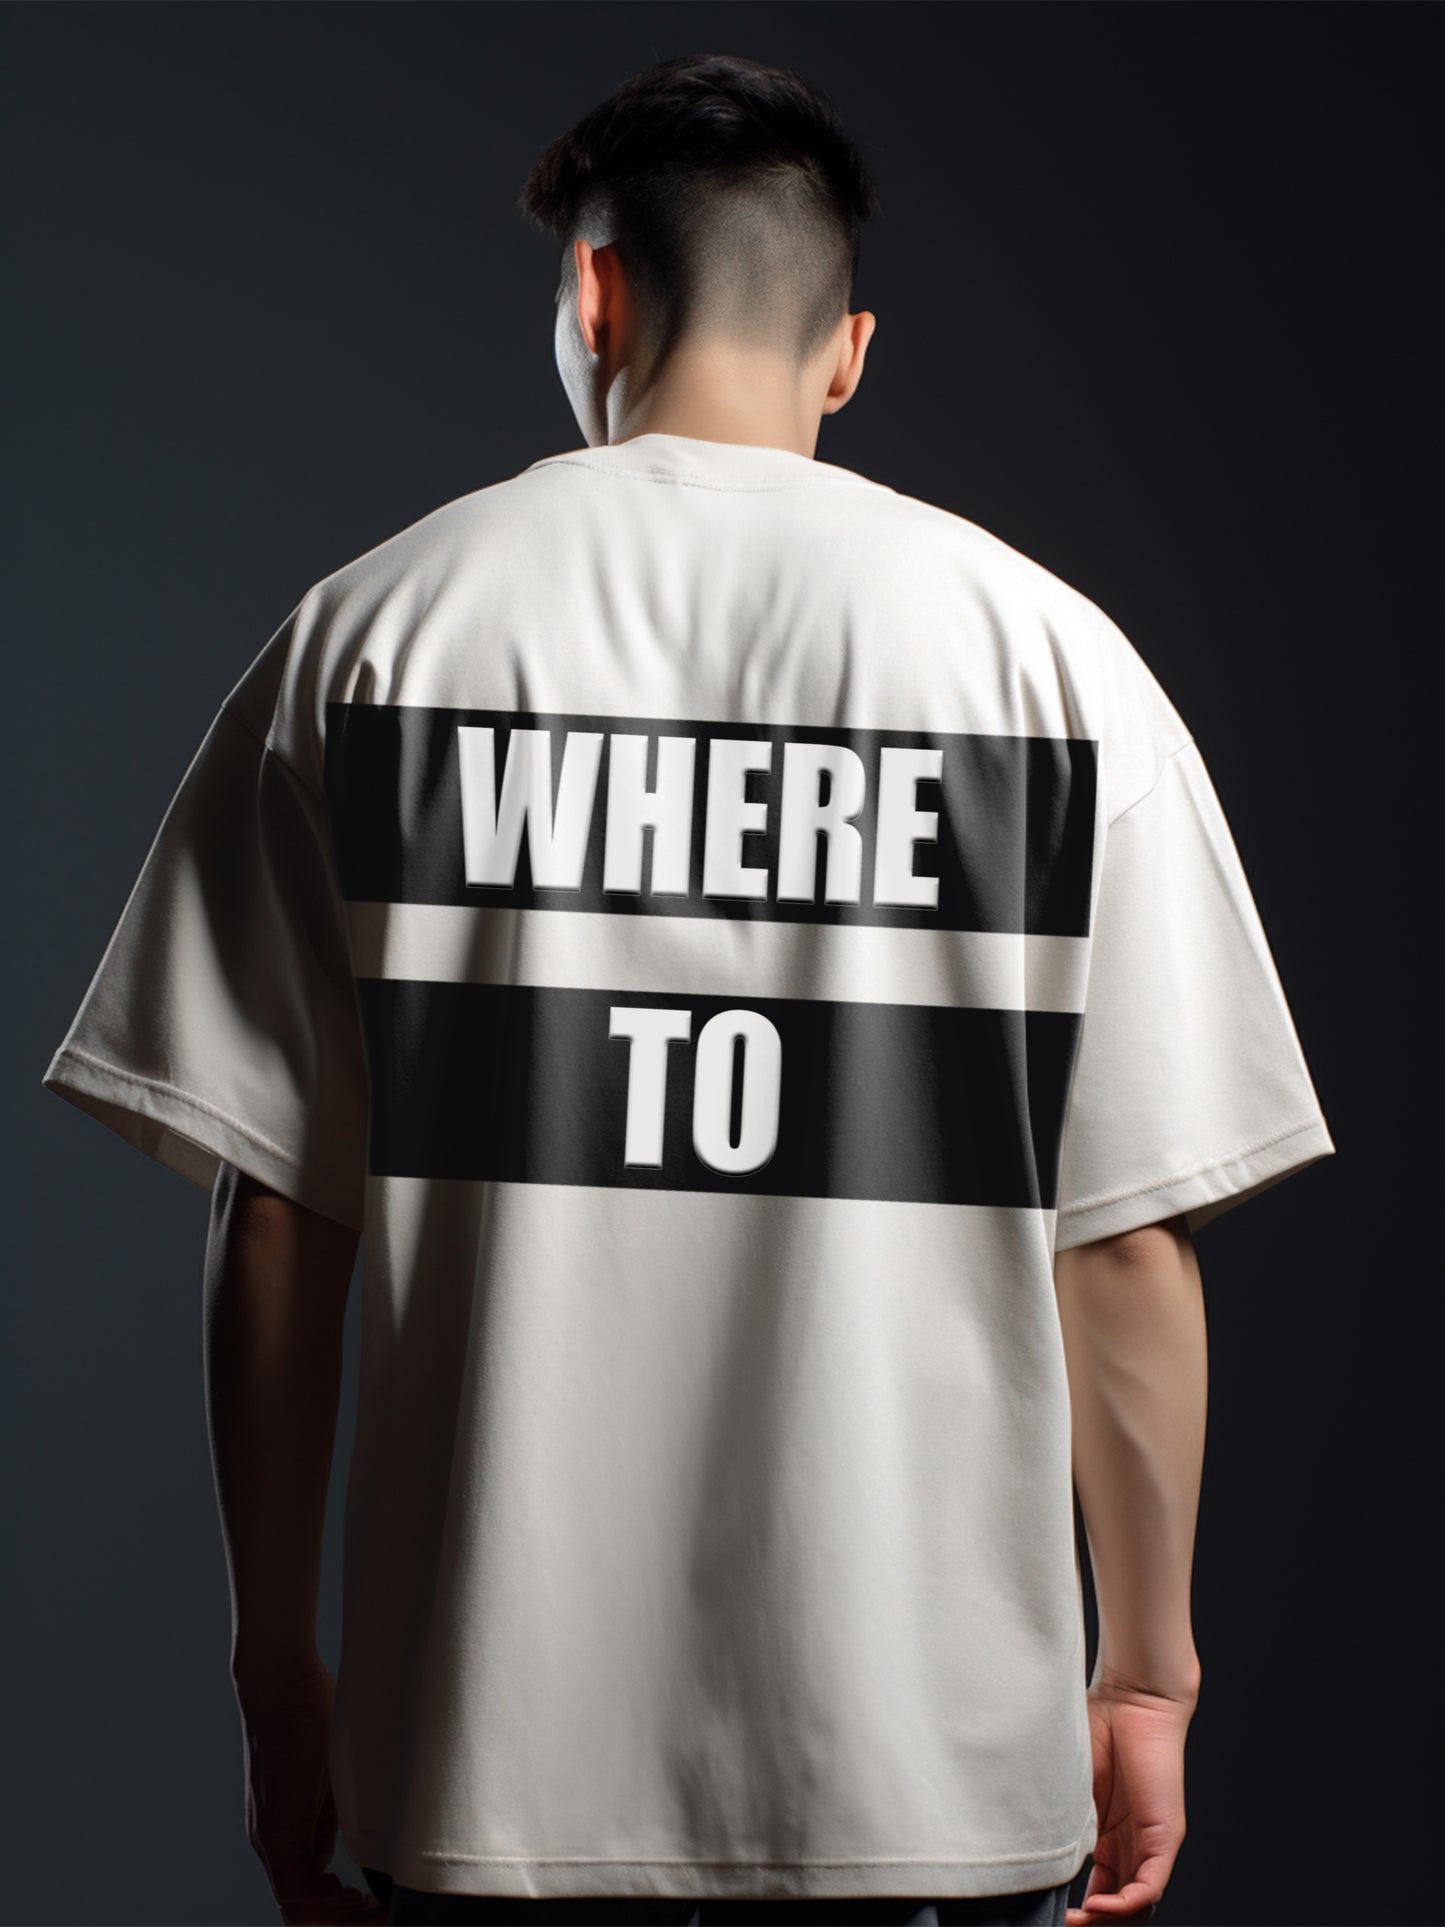 Nowhere And Where to- Unisex Oversized Printed T-Shirt